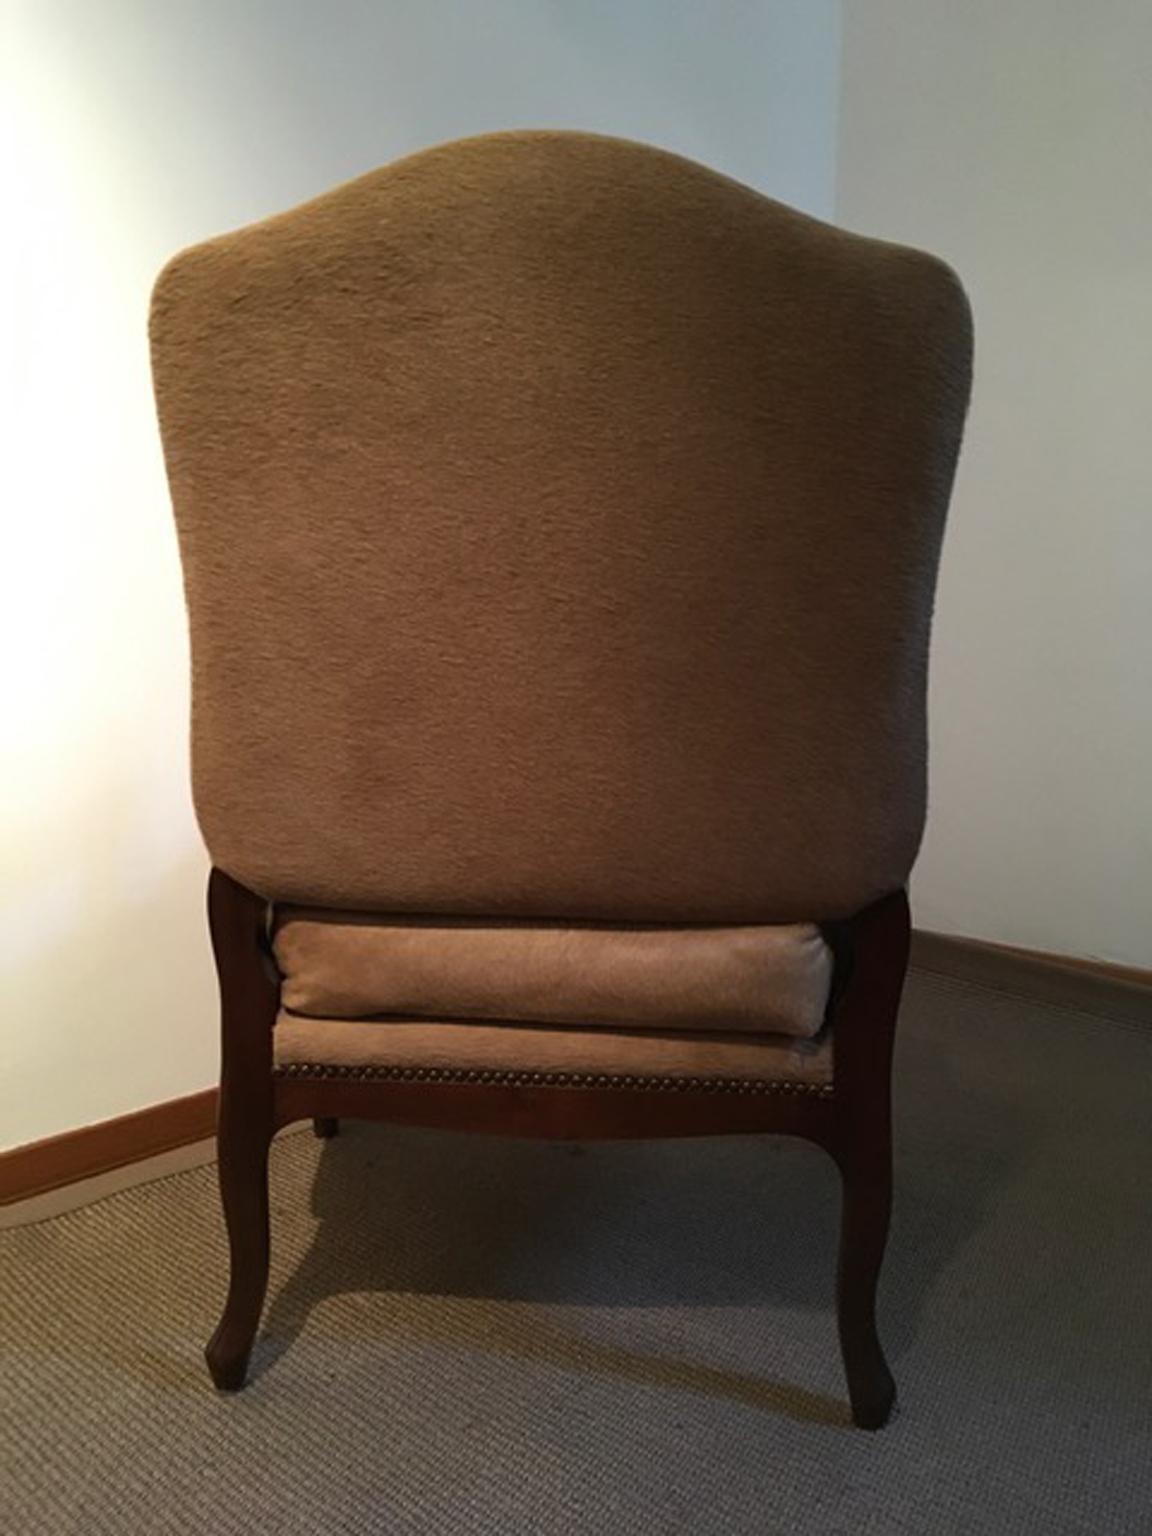 1990 Italy Postmodern Blond Cow Leather Armachair For Sale 9